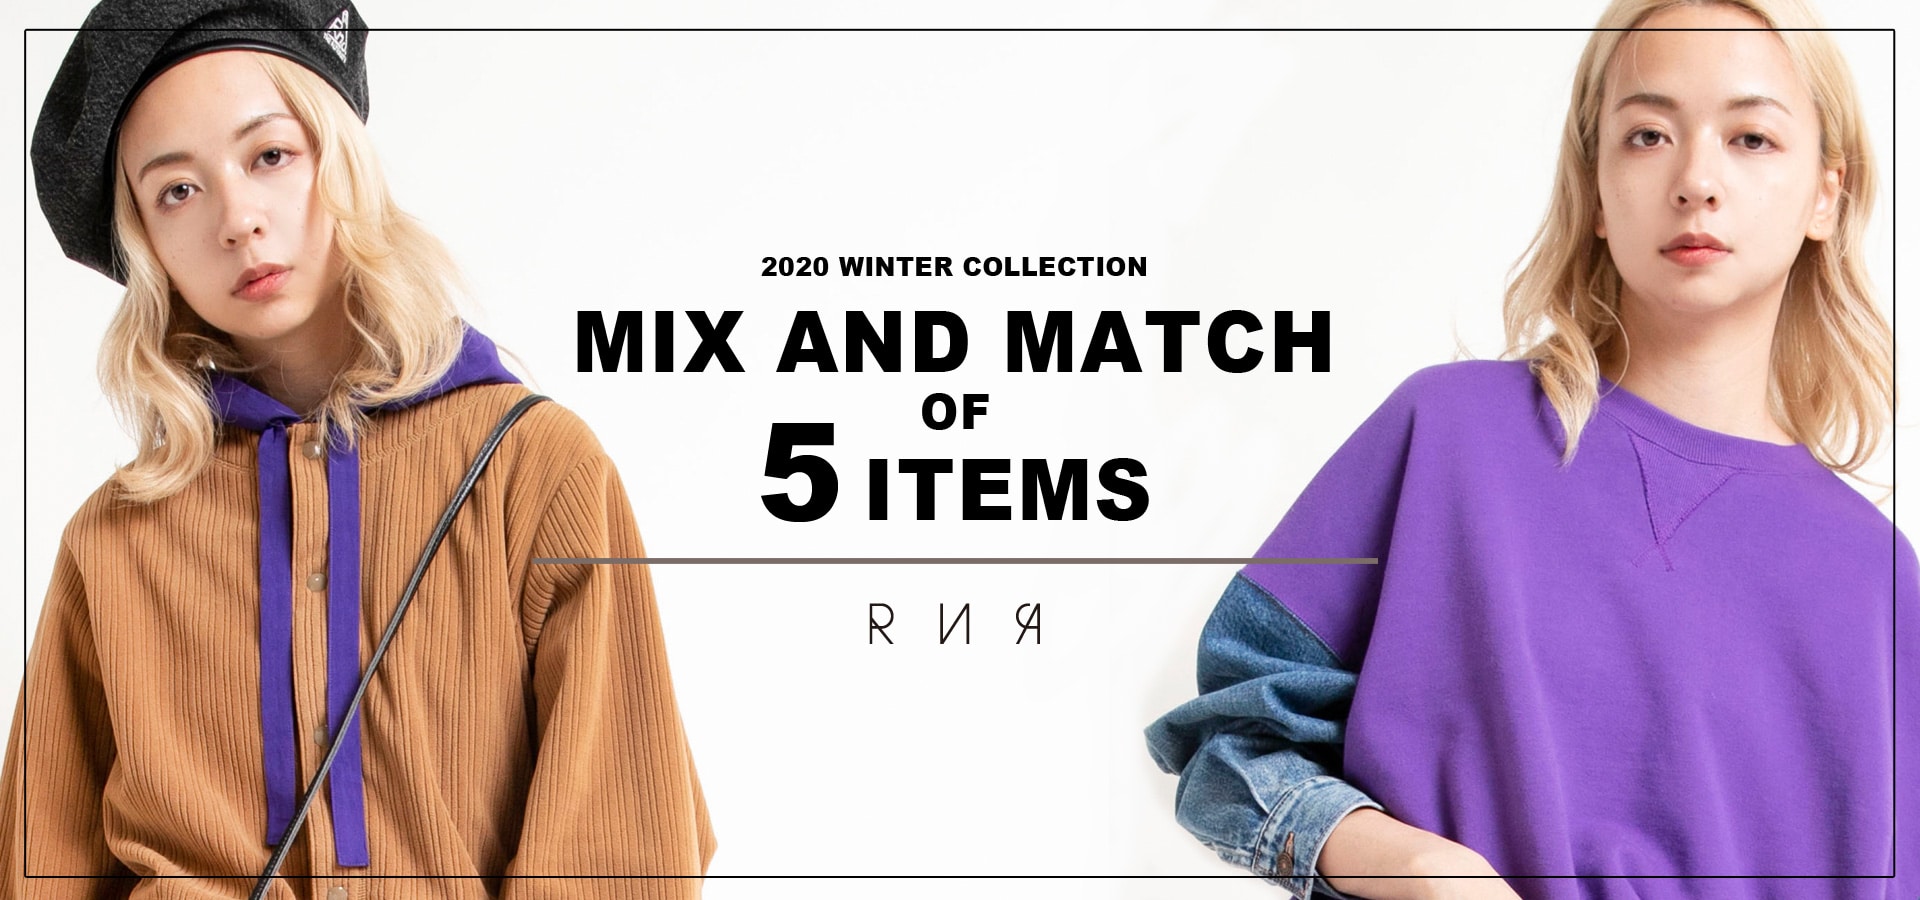 RNA MIX AND MATCH OF 5ITEMS